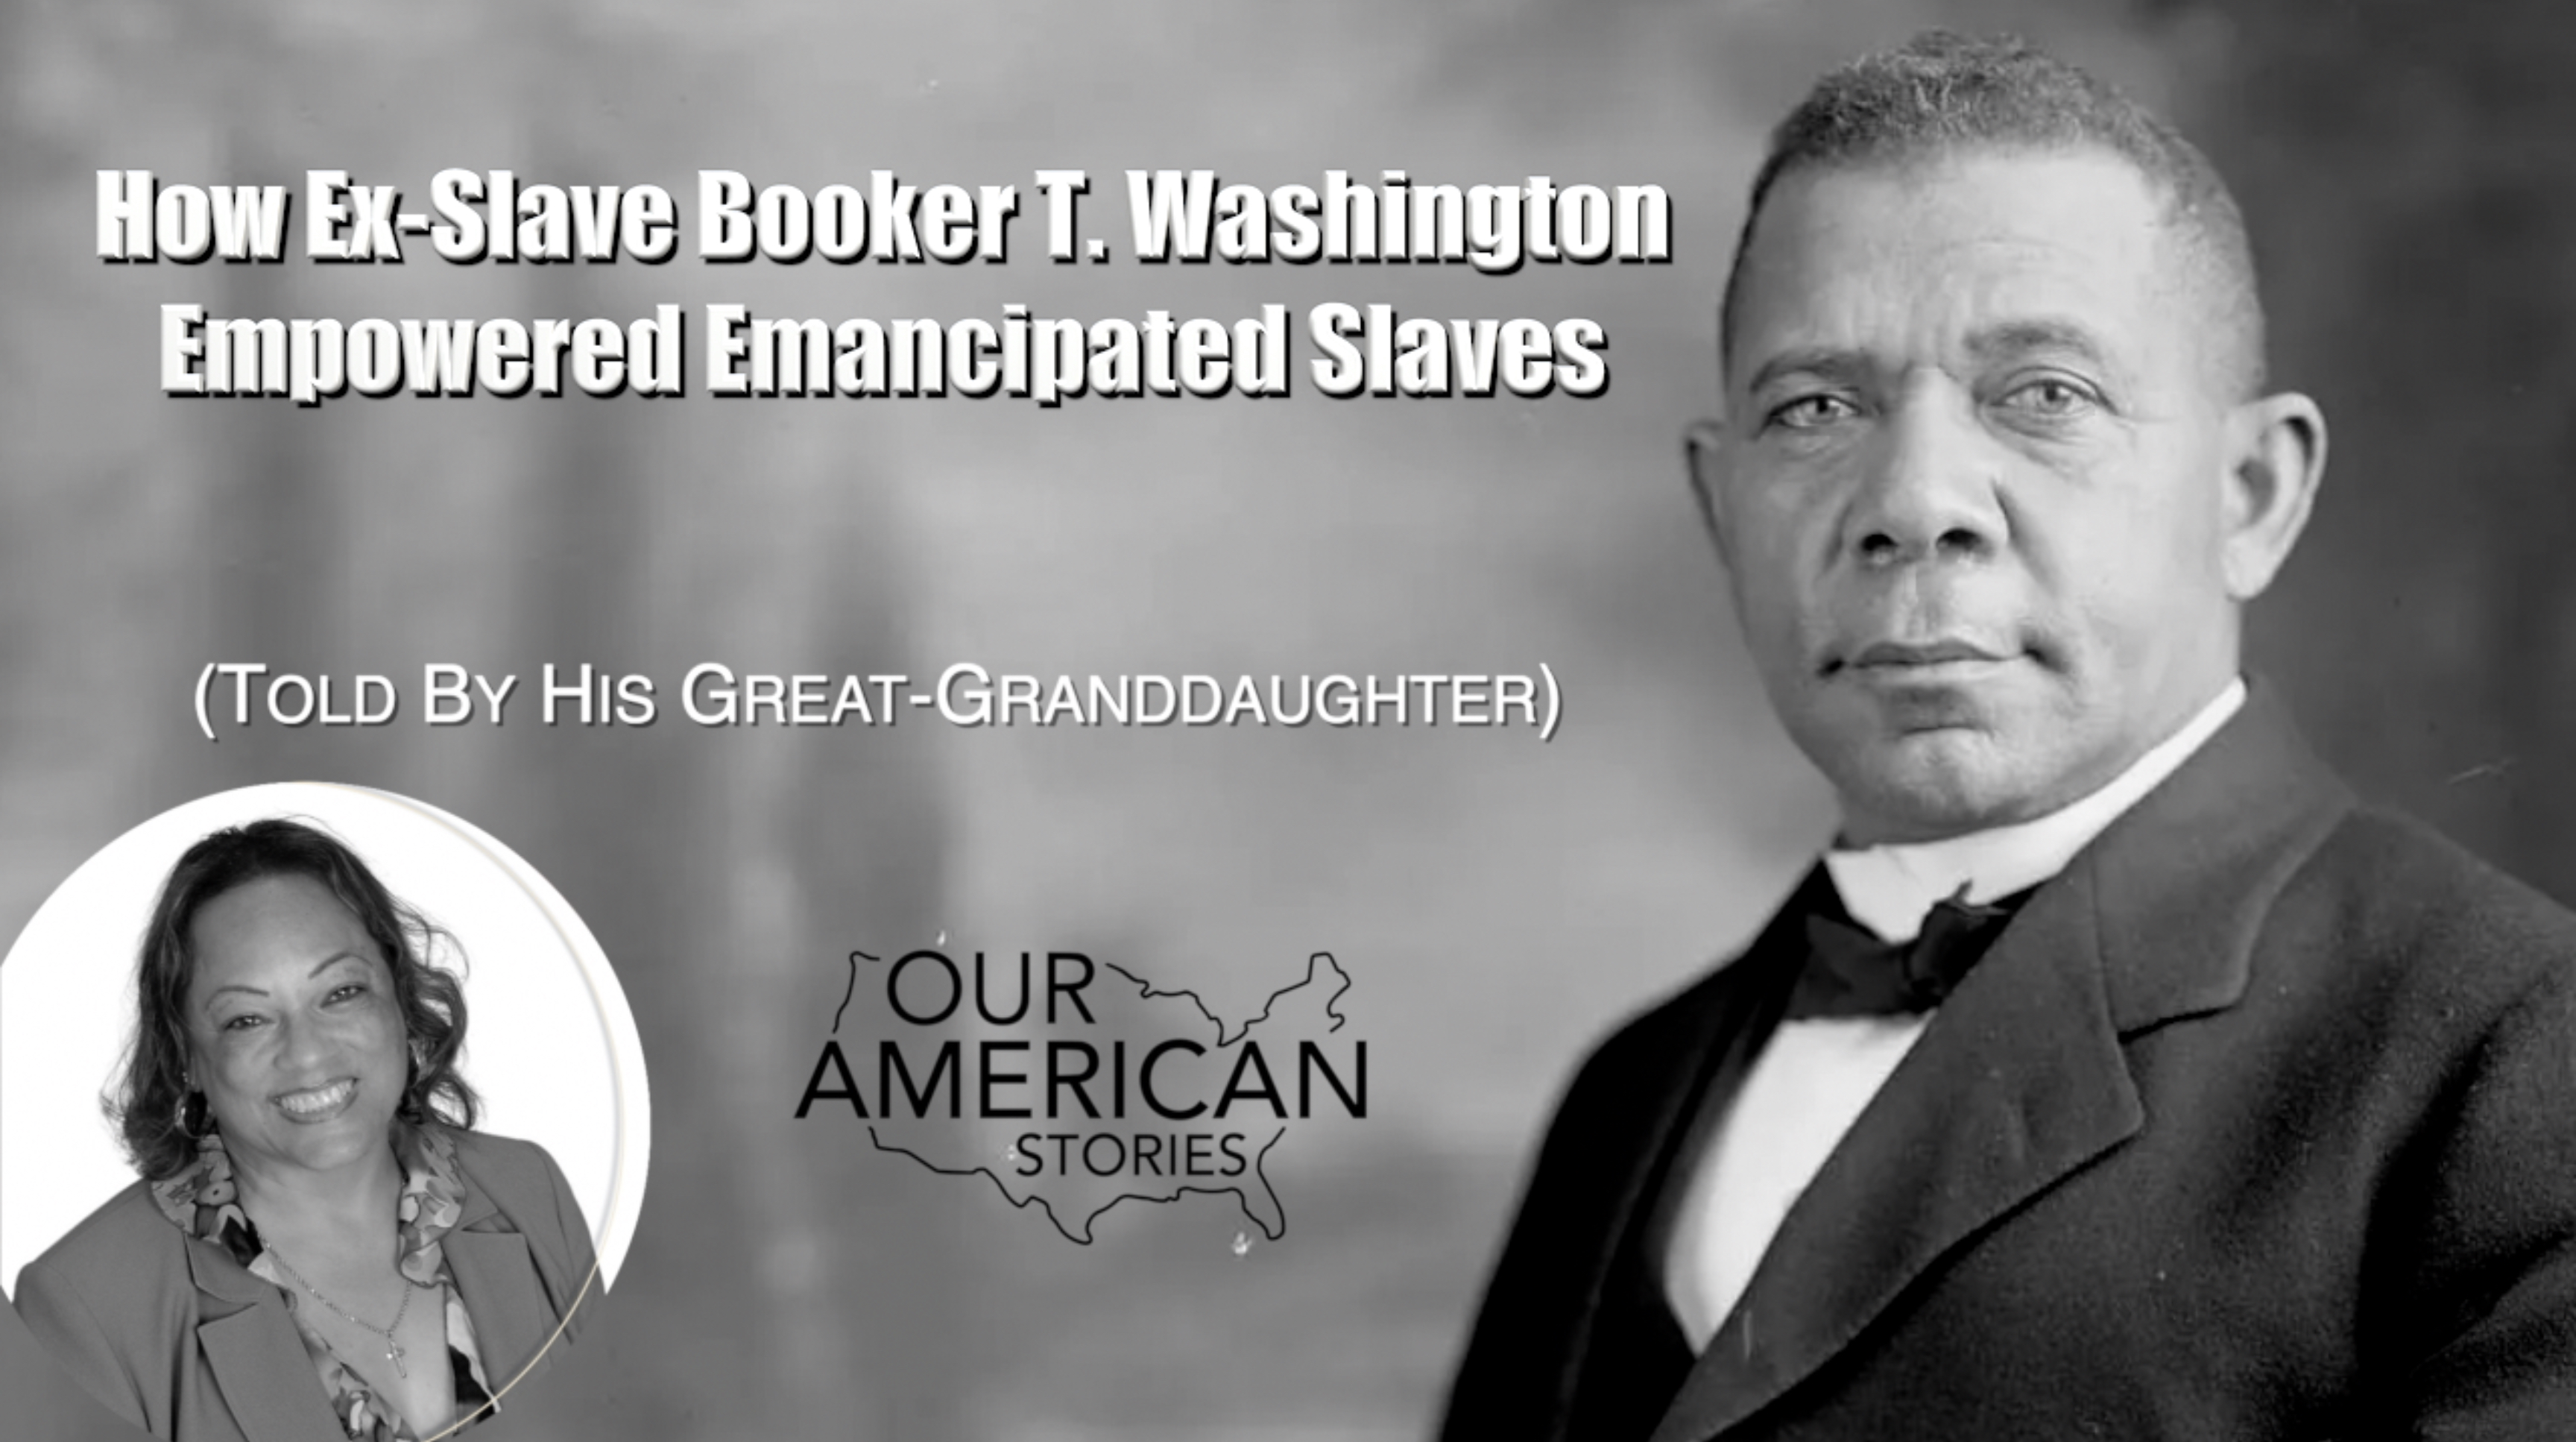 How Ex-Slave Booker T. Washington Empowered Emancipated Slaves (Told By His Great-Granddaughter)